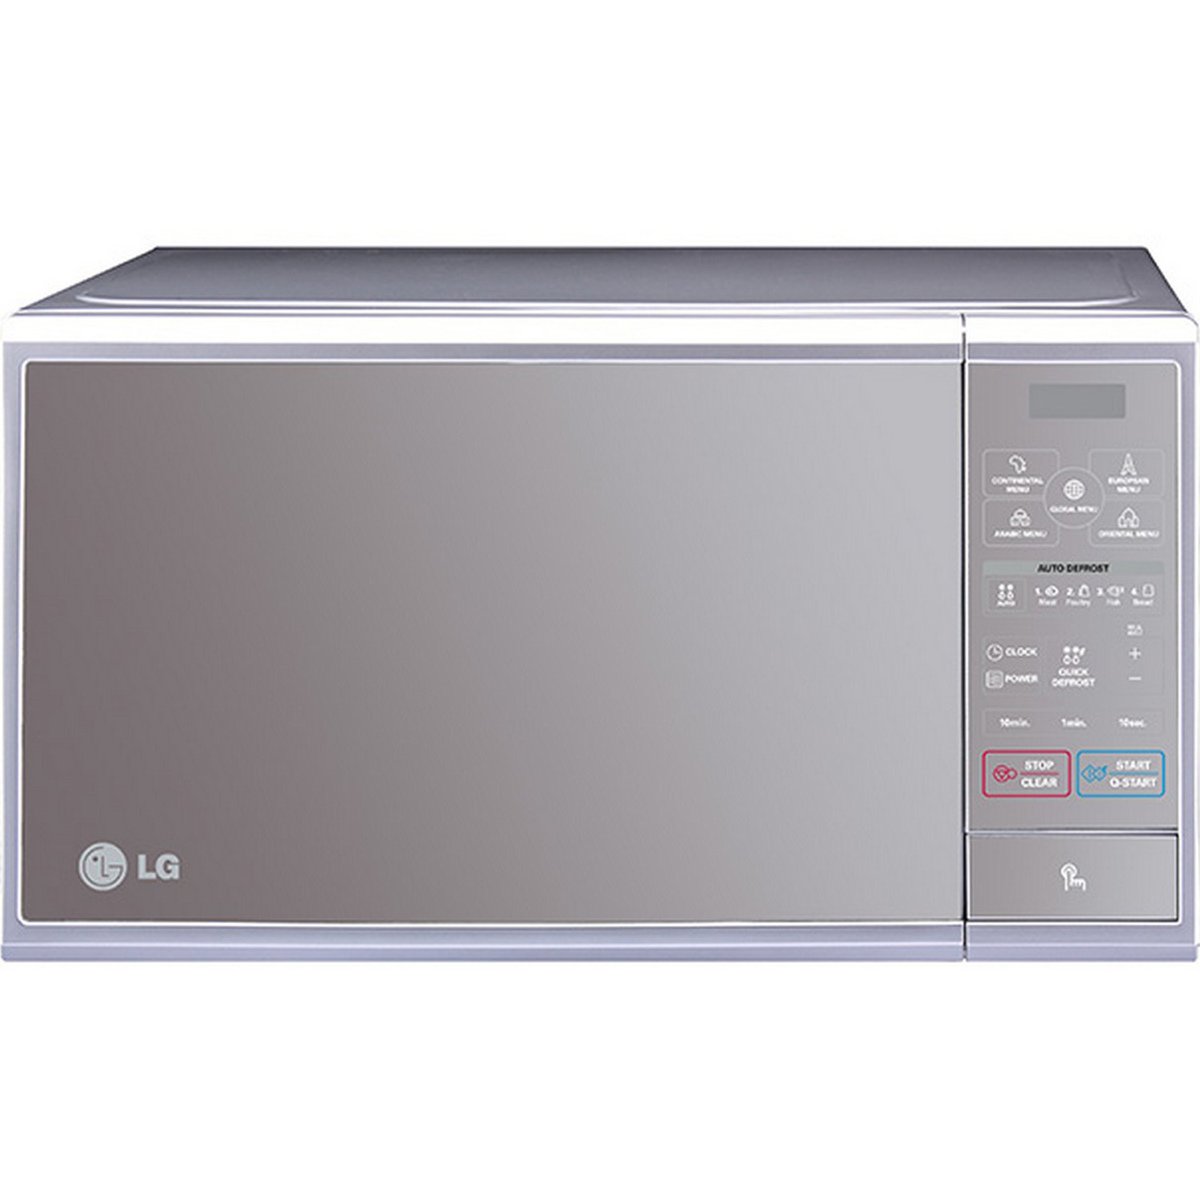 LG Microwave With Grill MH7044S 30Ltr